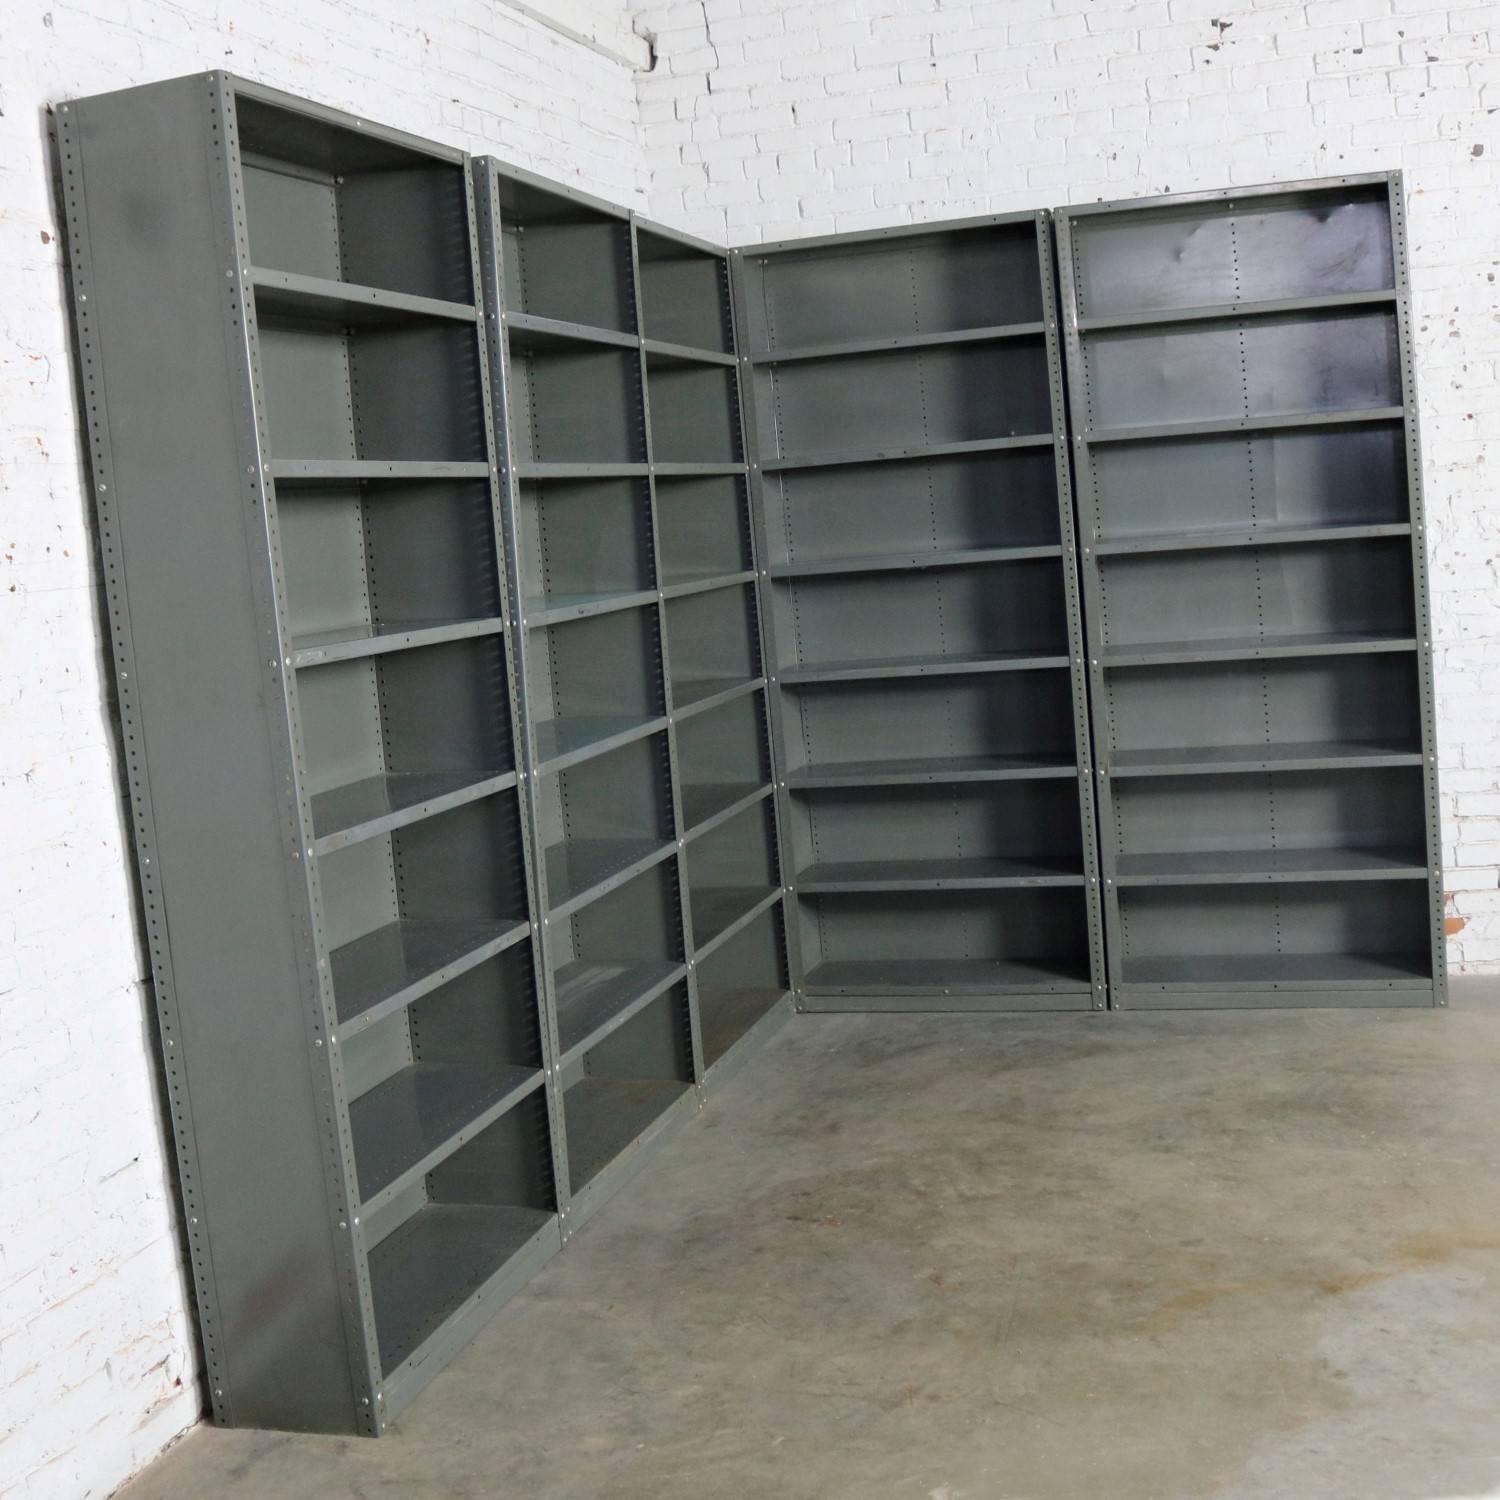 Awesome vintage industrial steel bookcase or shelving units. They are painted an industrial grey or green and have great age patina. All are in solid sturdy condition, but each have their own dings, dents, and bare spots that create a wonderful age